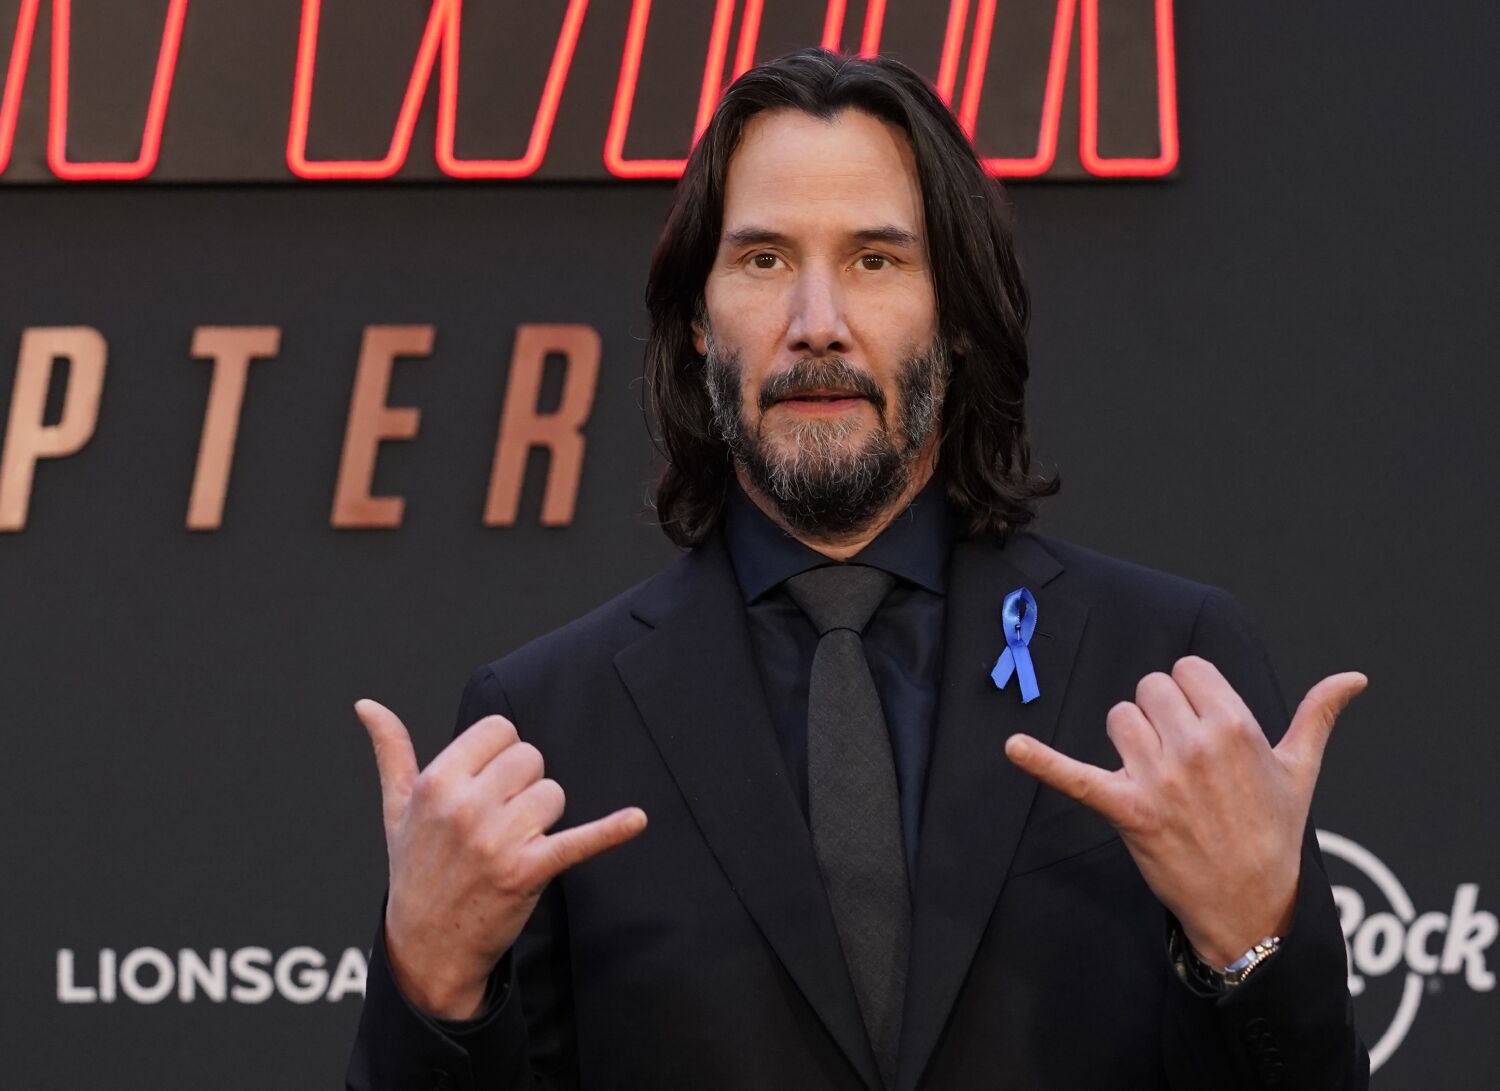 Keanu Reeves saying 'my honey' and customizing tees gives us more reasons to love him